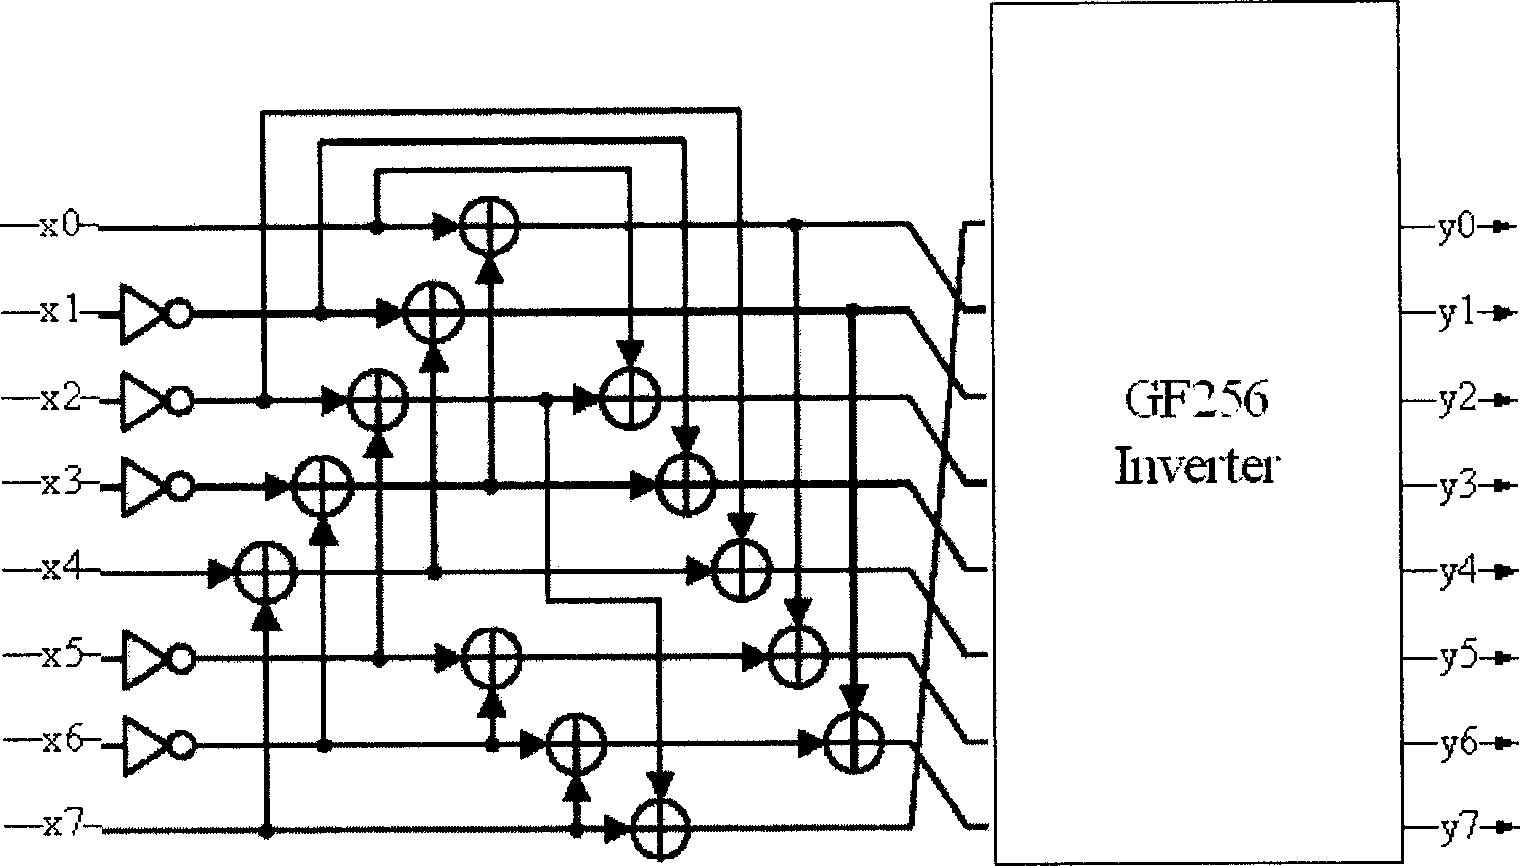 Sbox module optimizing method and circuit in AES encryption and decryption circuit